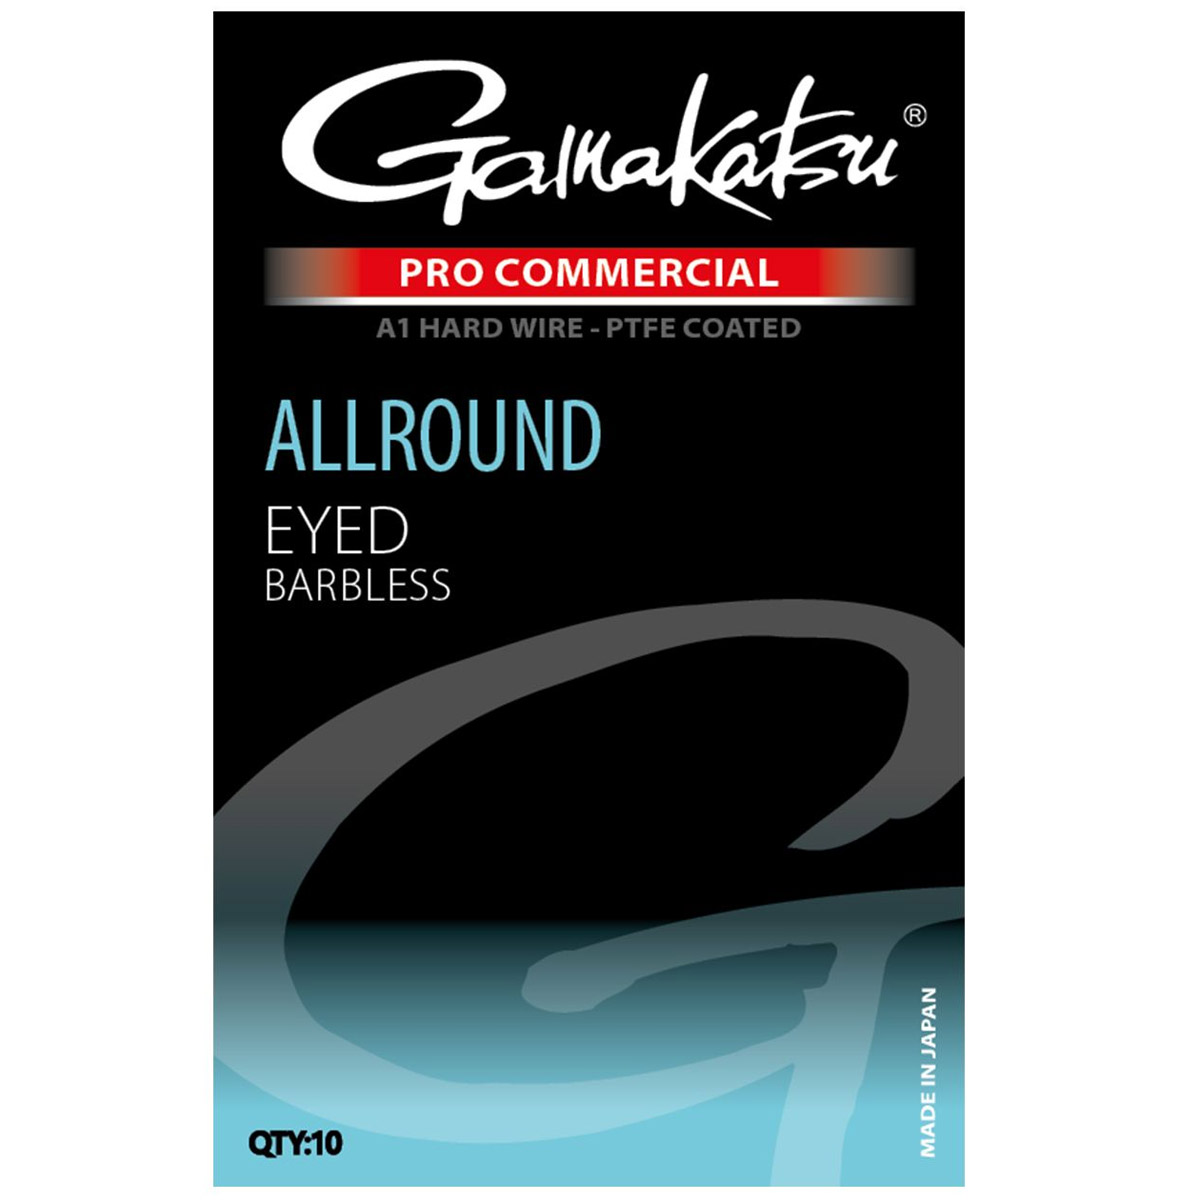 Gamakatsu Pro Commercial Allround A1 Eyed Barbless